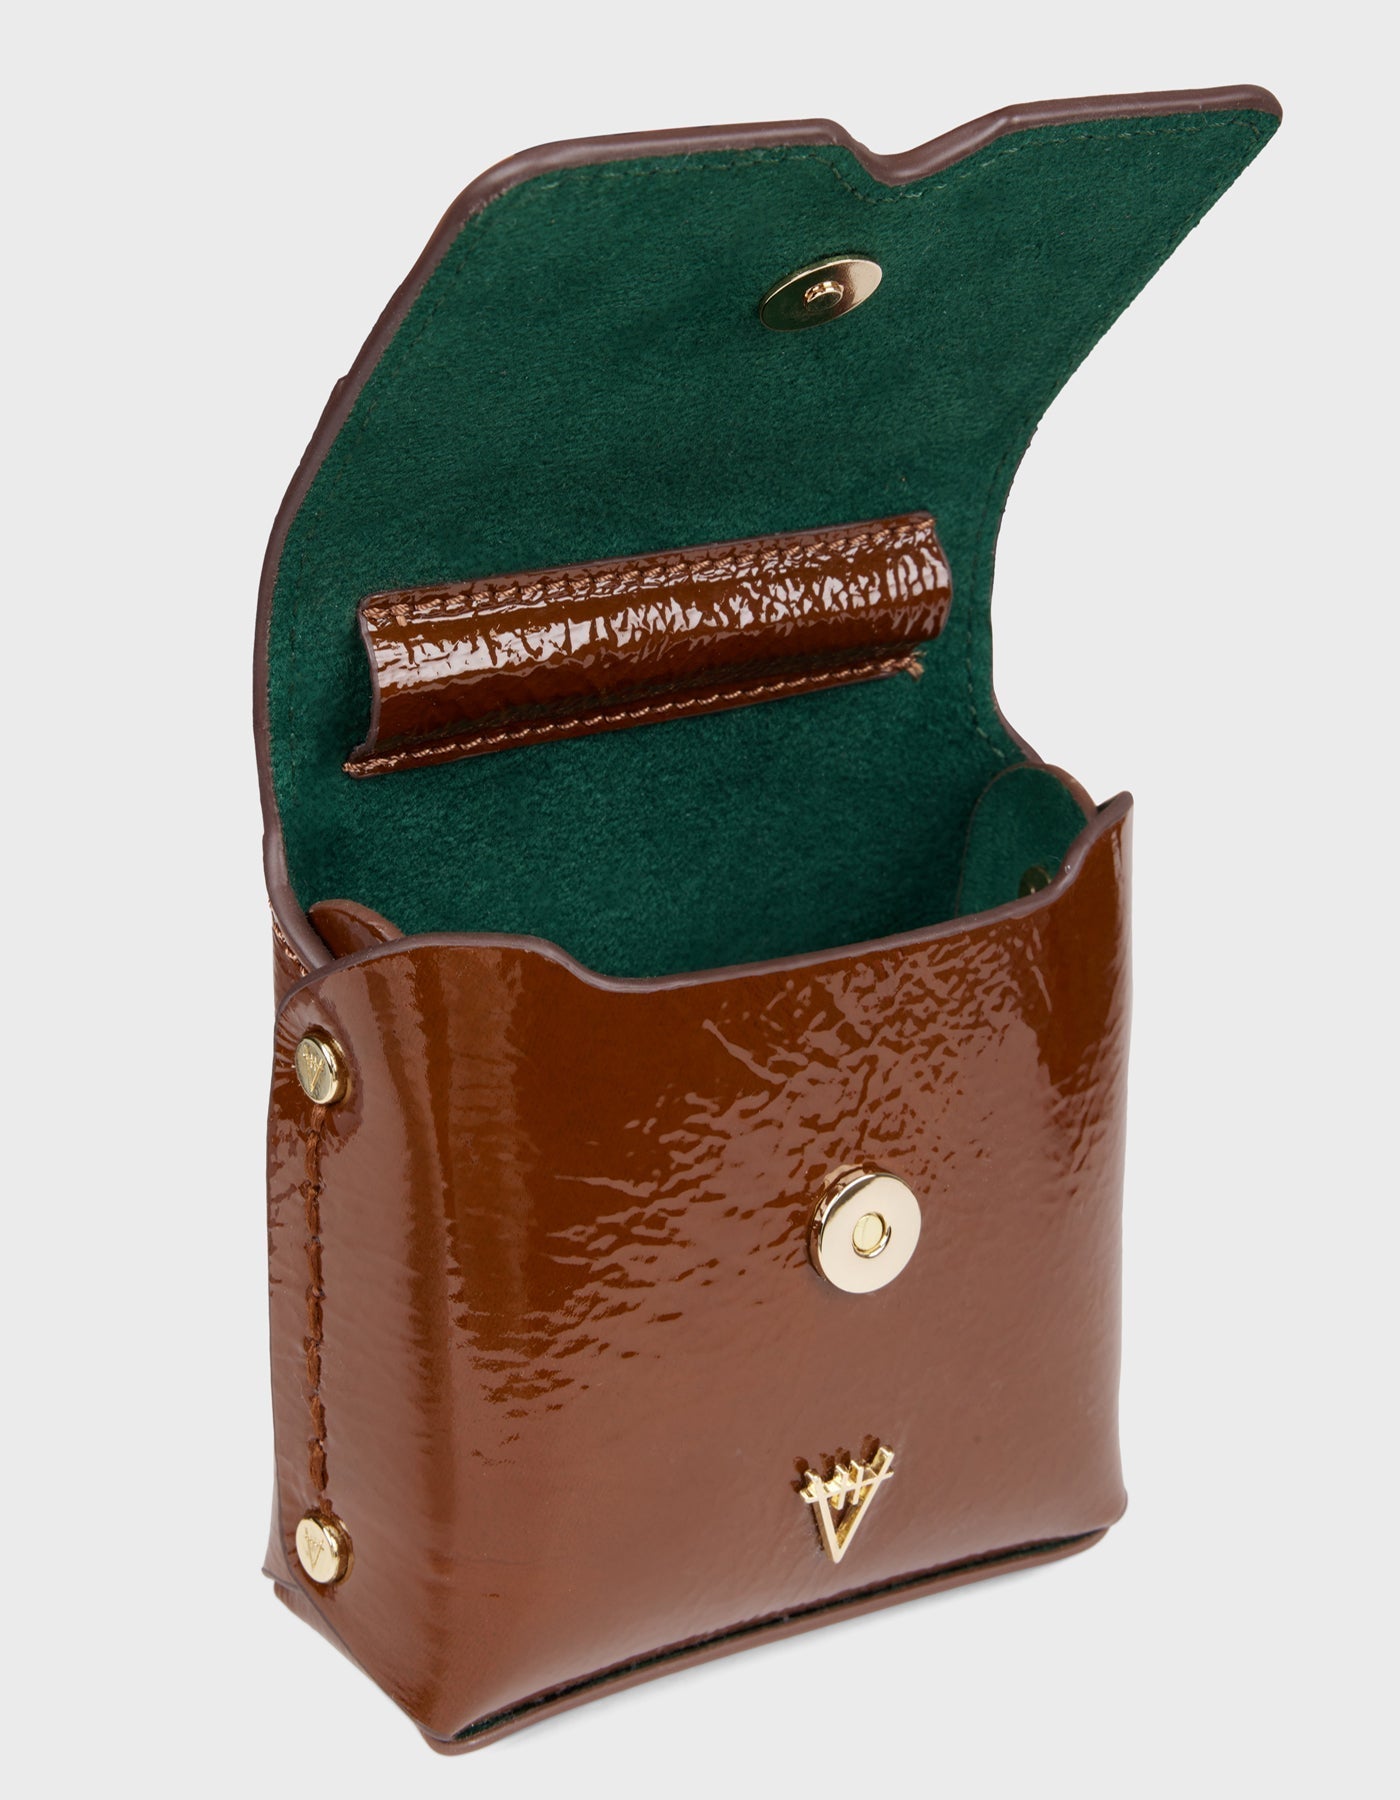 Baby Mare - Finest Quality HiVa Atelier GmbH Leather Accessories